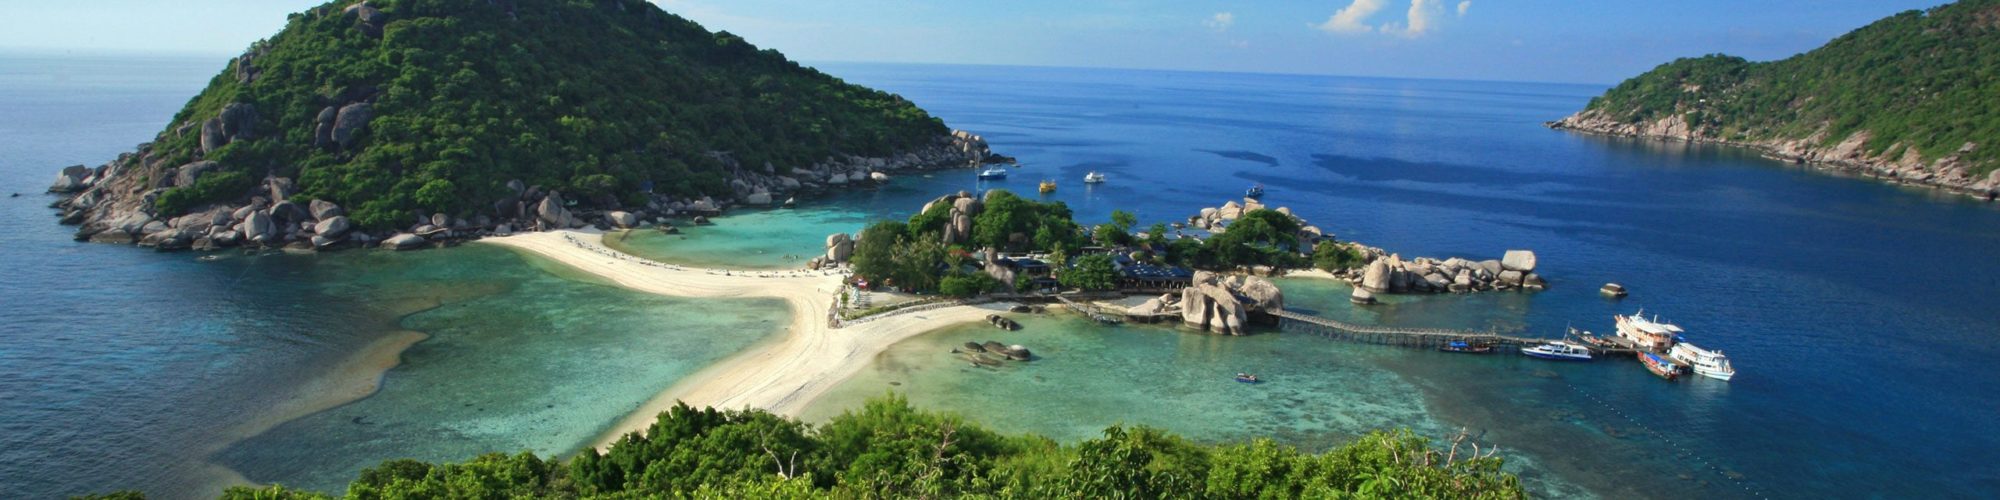 Koh Phangan travel agents packages deals